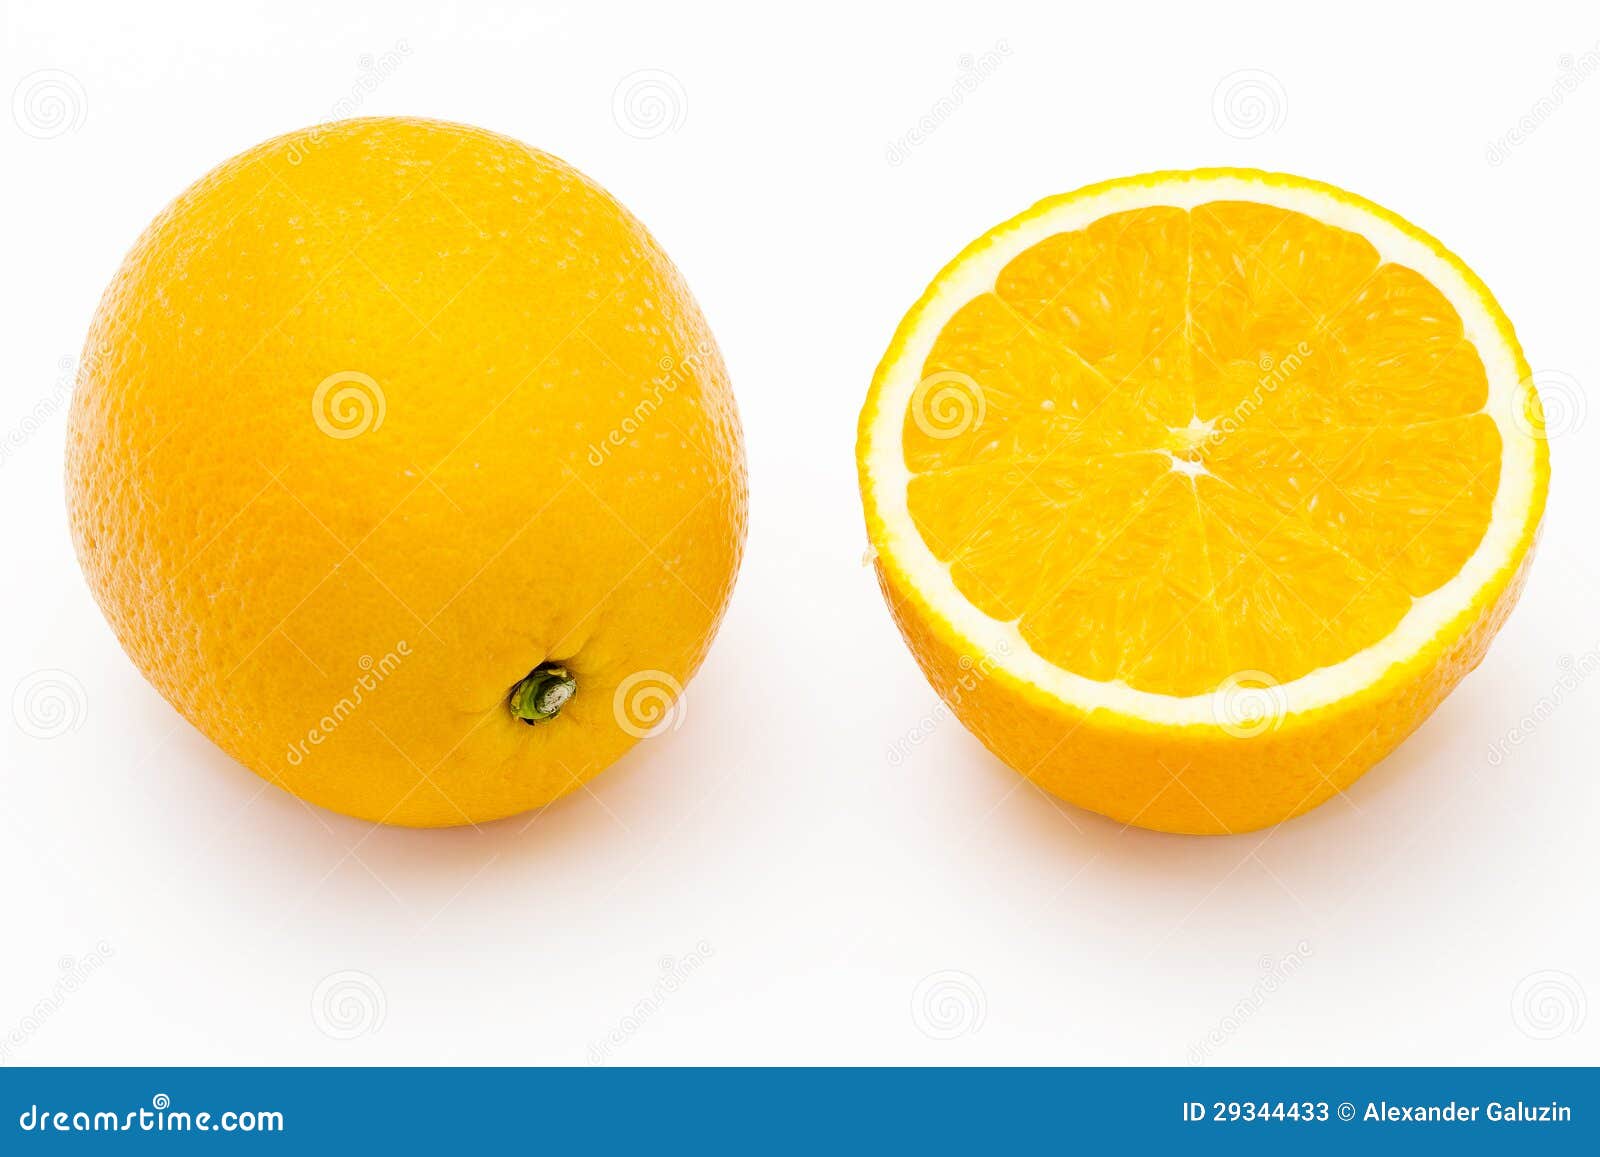 whole and halved oranges